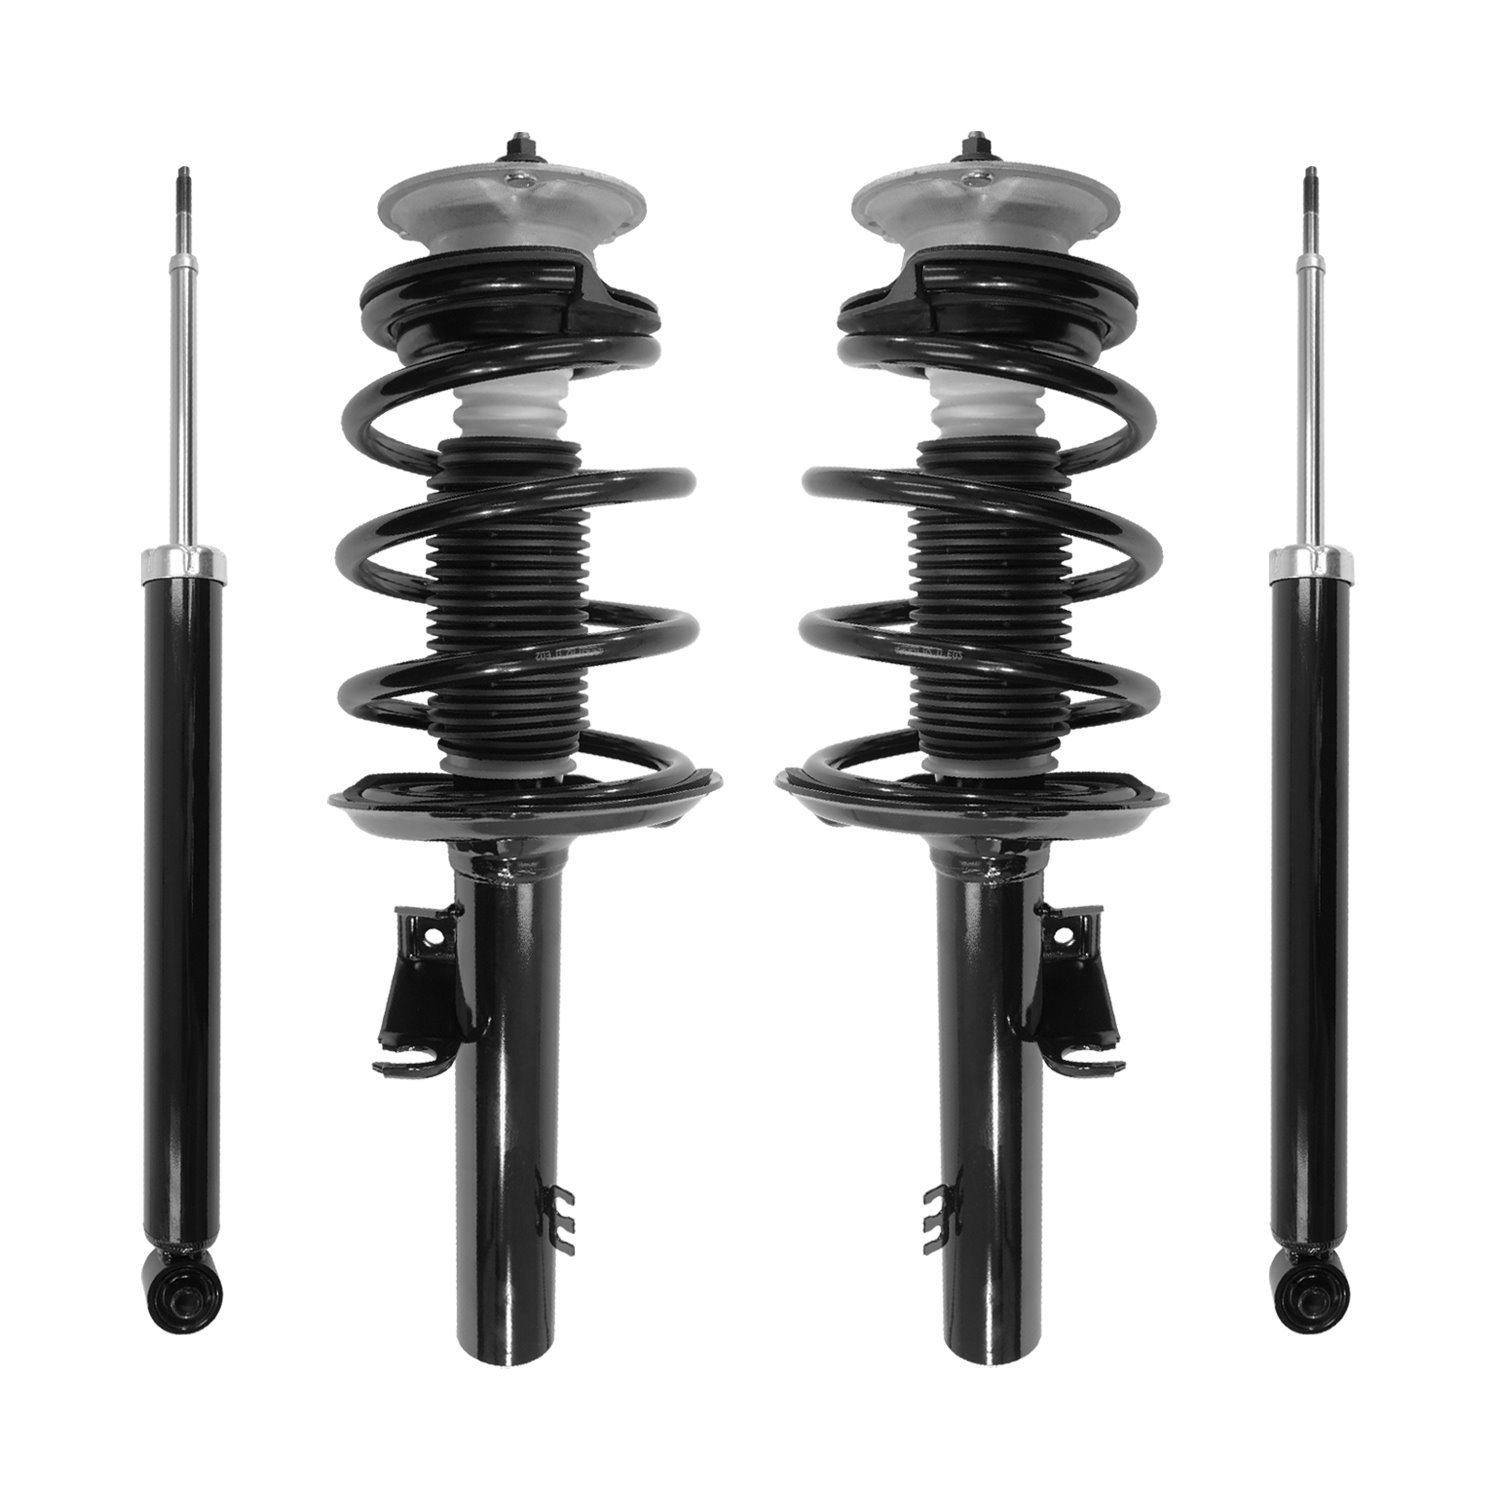 4-13221-257140-001 Front & Rear Suspension Strut & Coil Spring Assembly Fits Select BMW X3